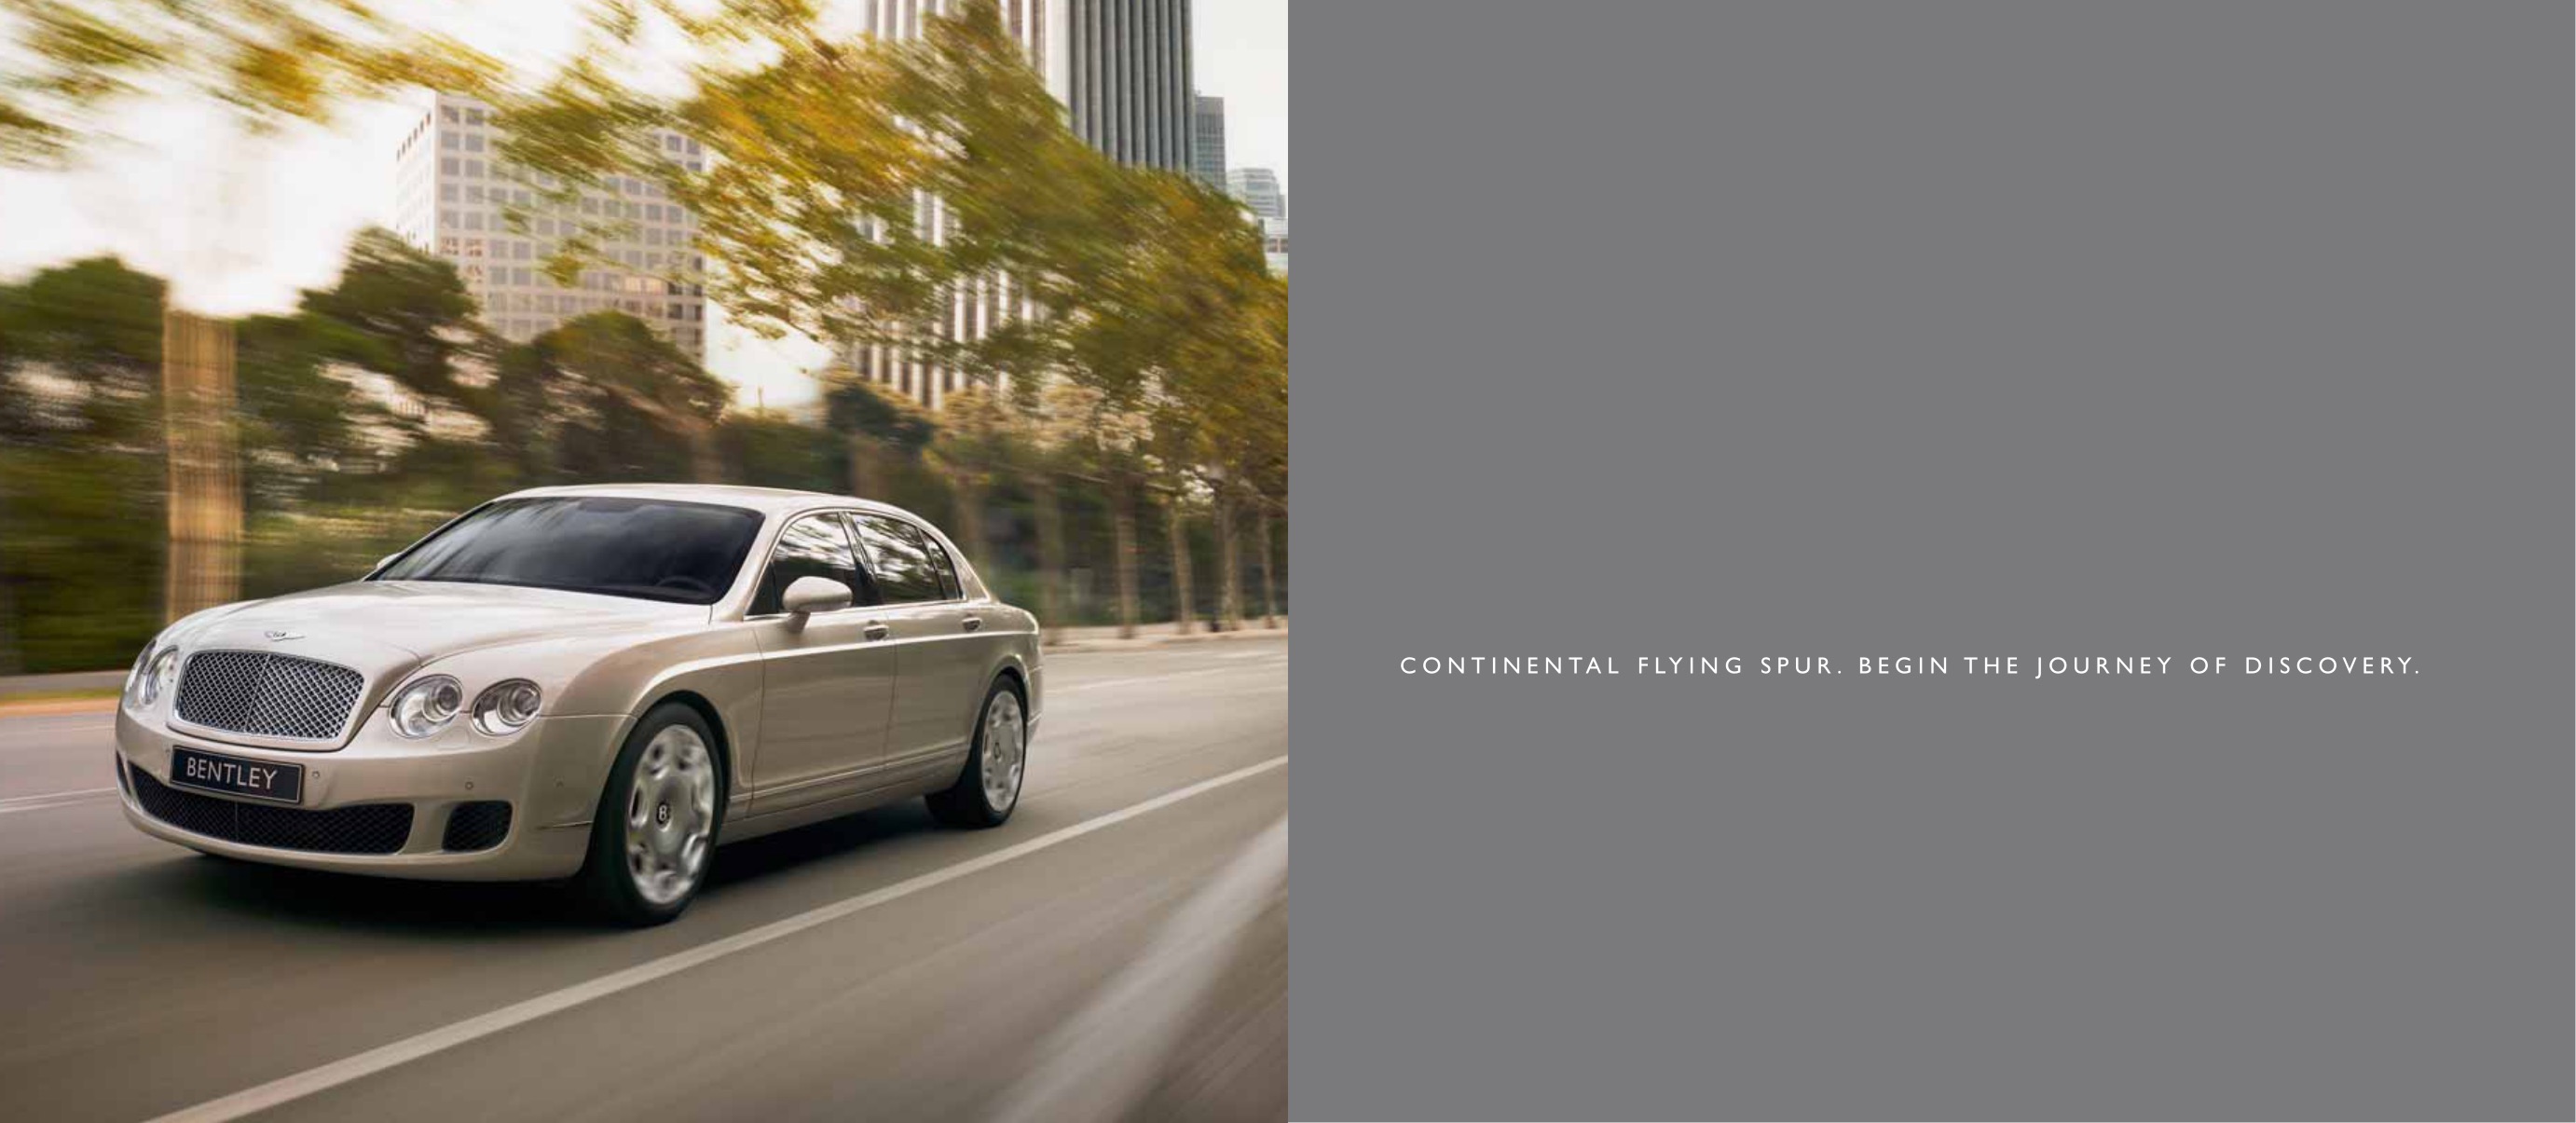 2009 Bentley Continental Flying Spur Brochure Page 7